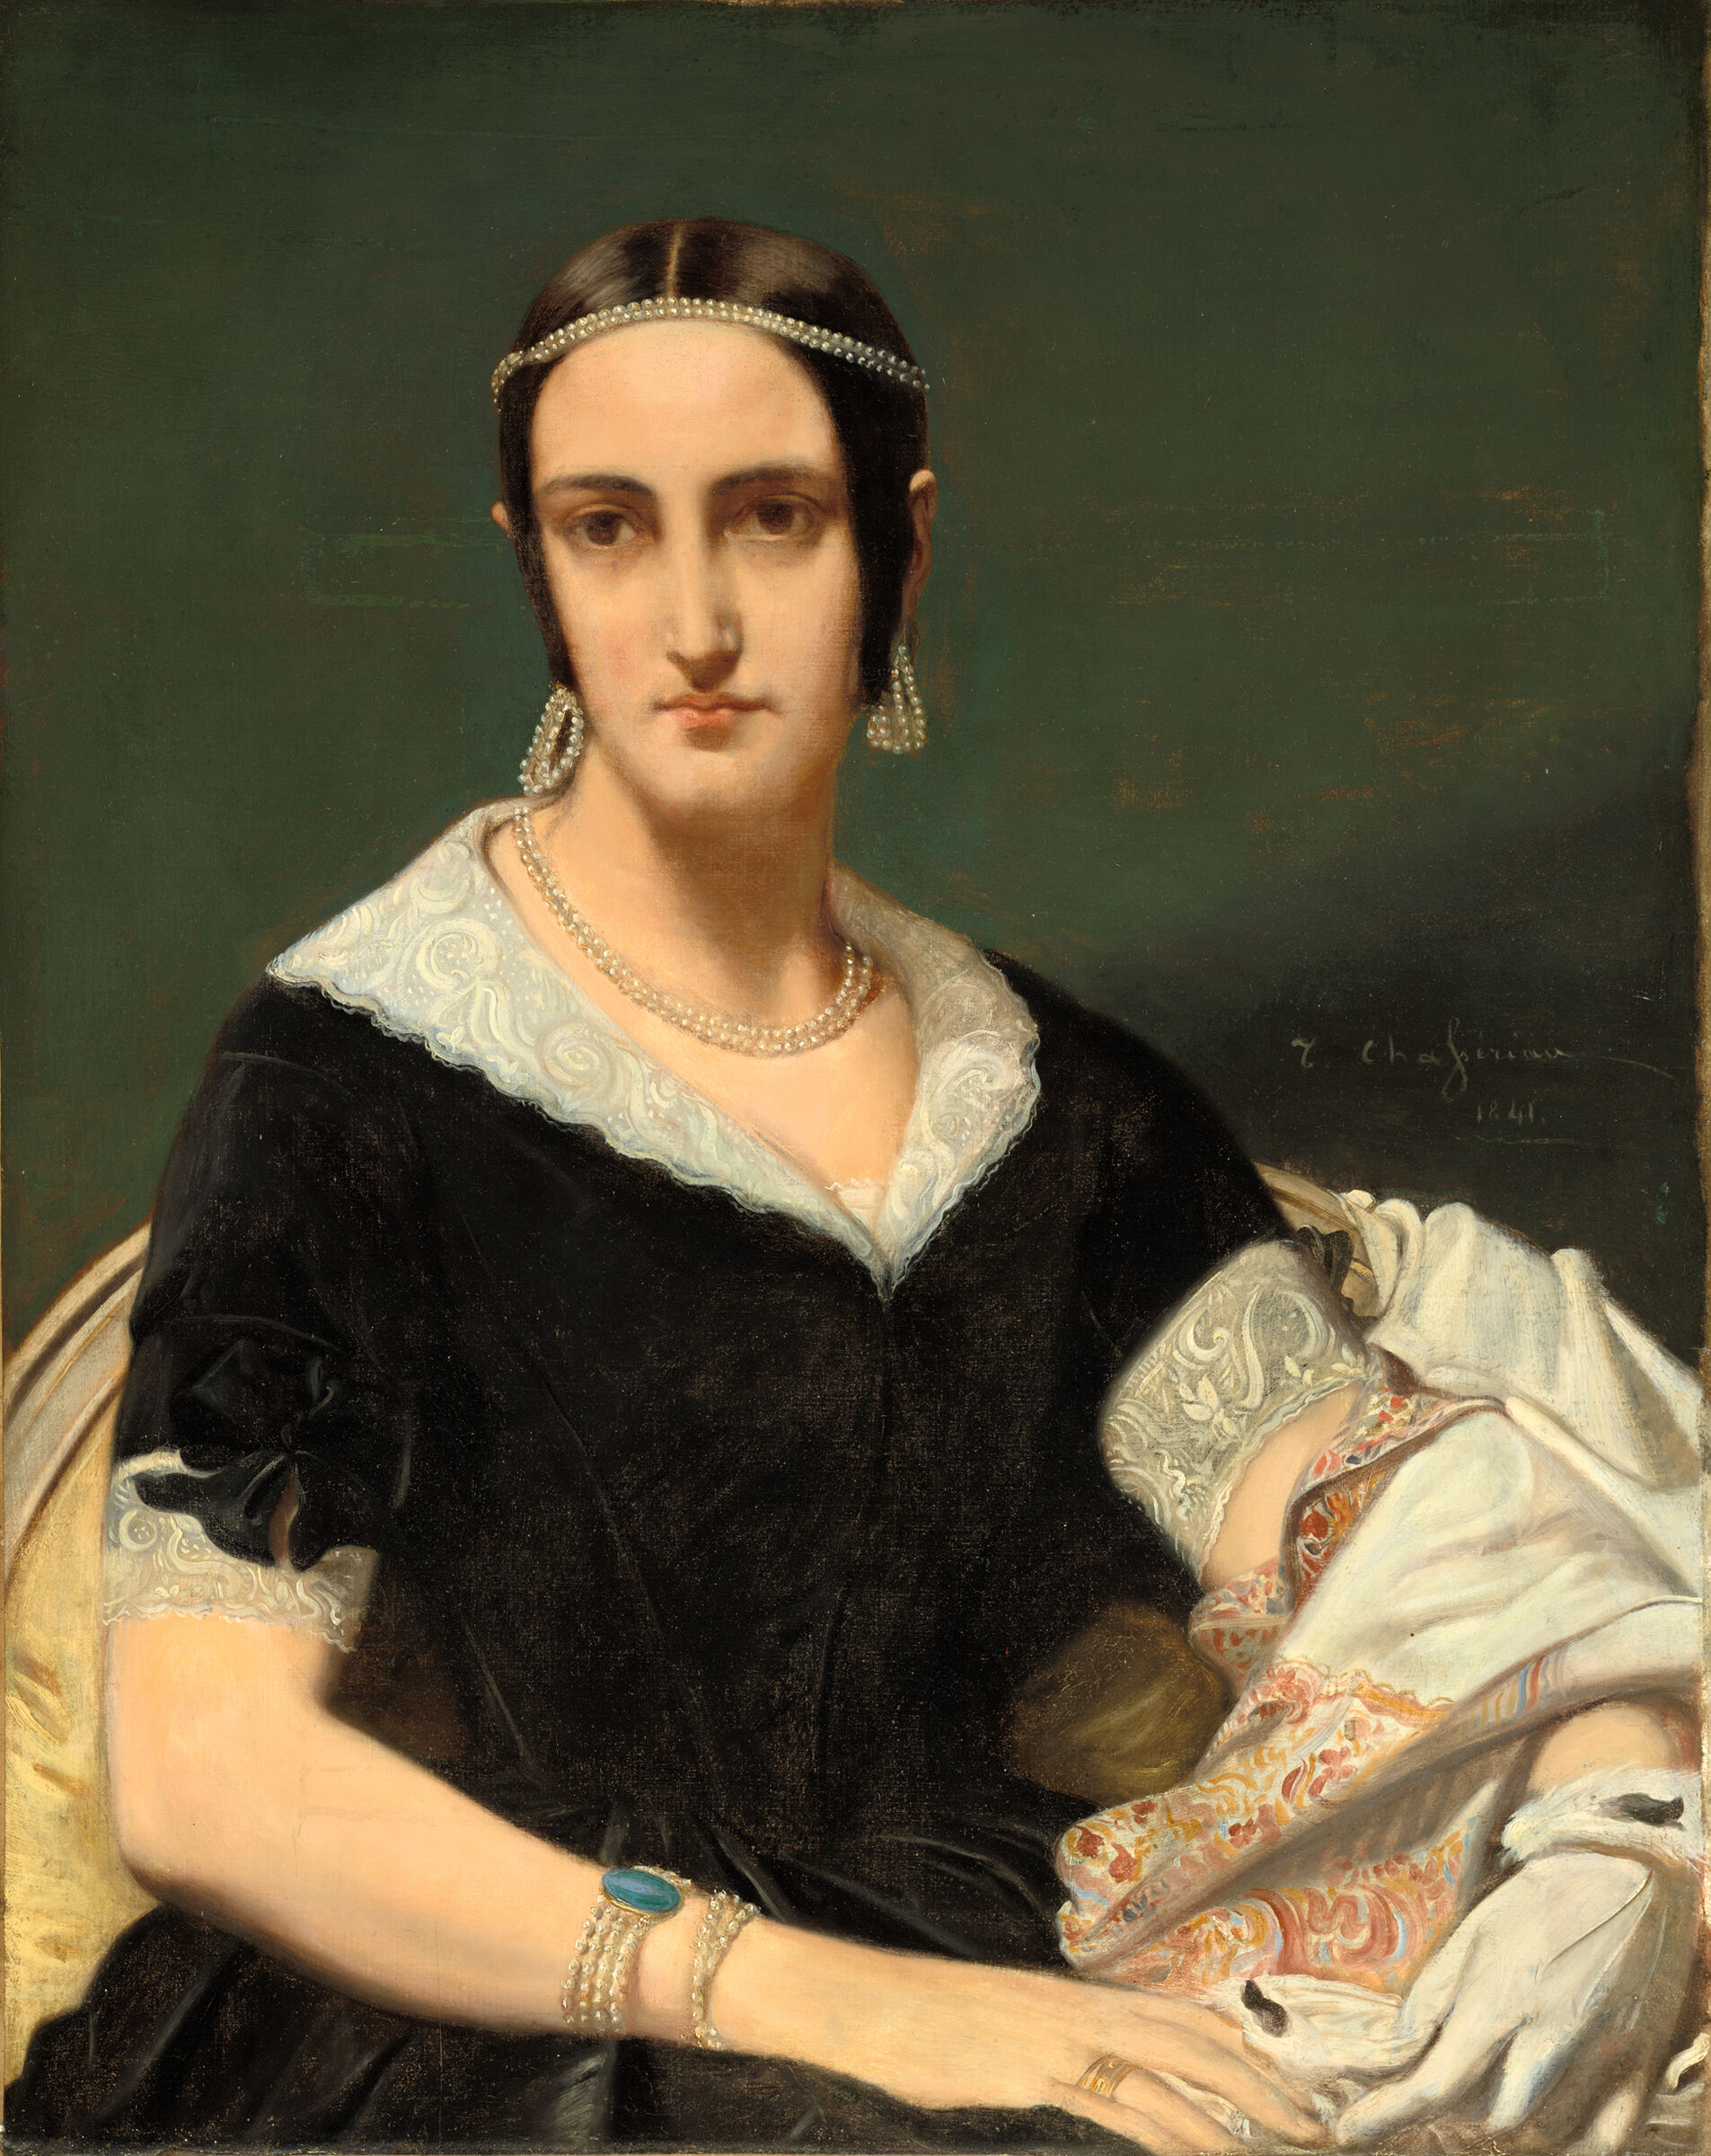 Portrait Of A Young Woman With Pearl Necklaces